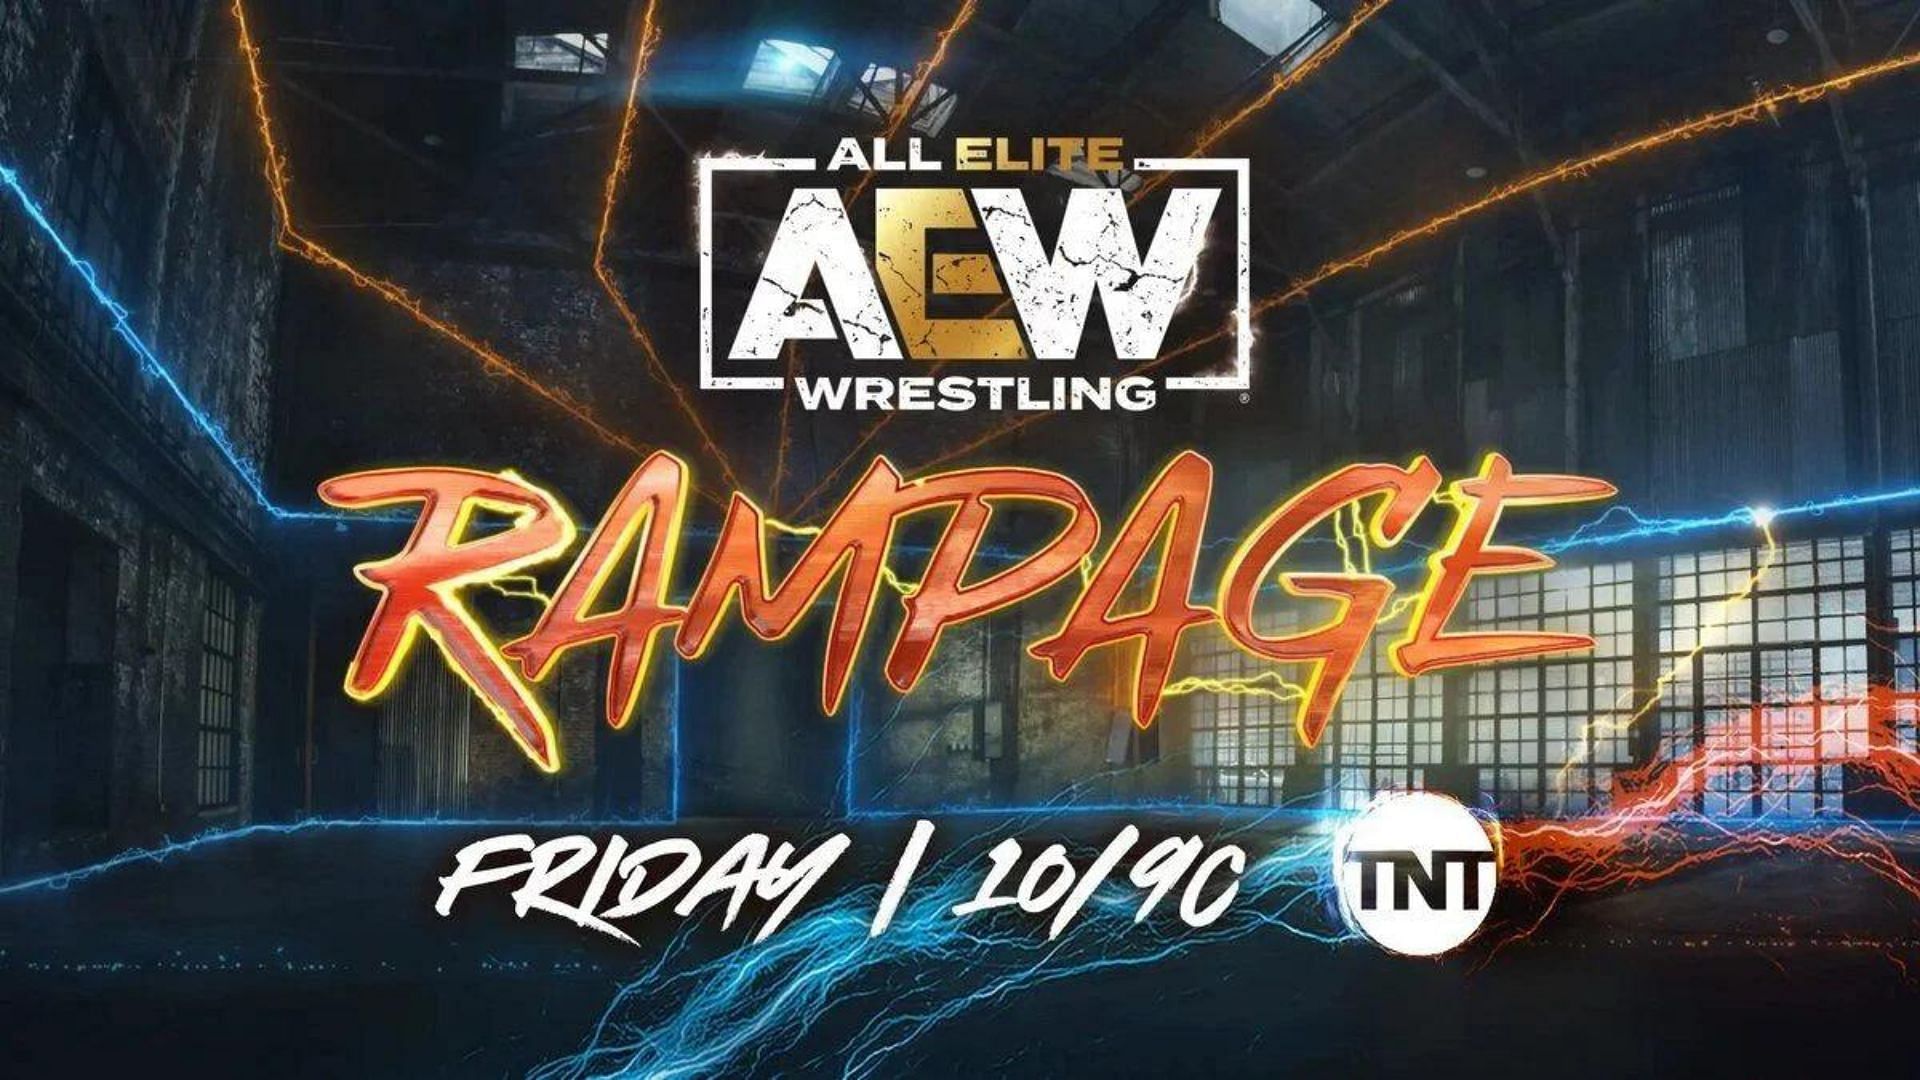 Rampage is AEW